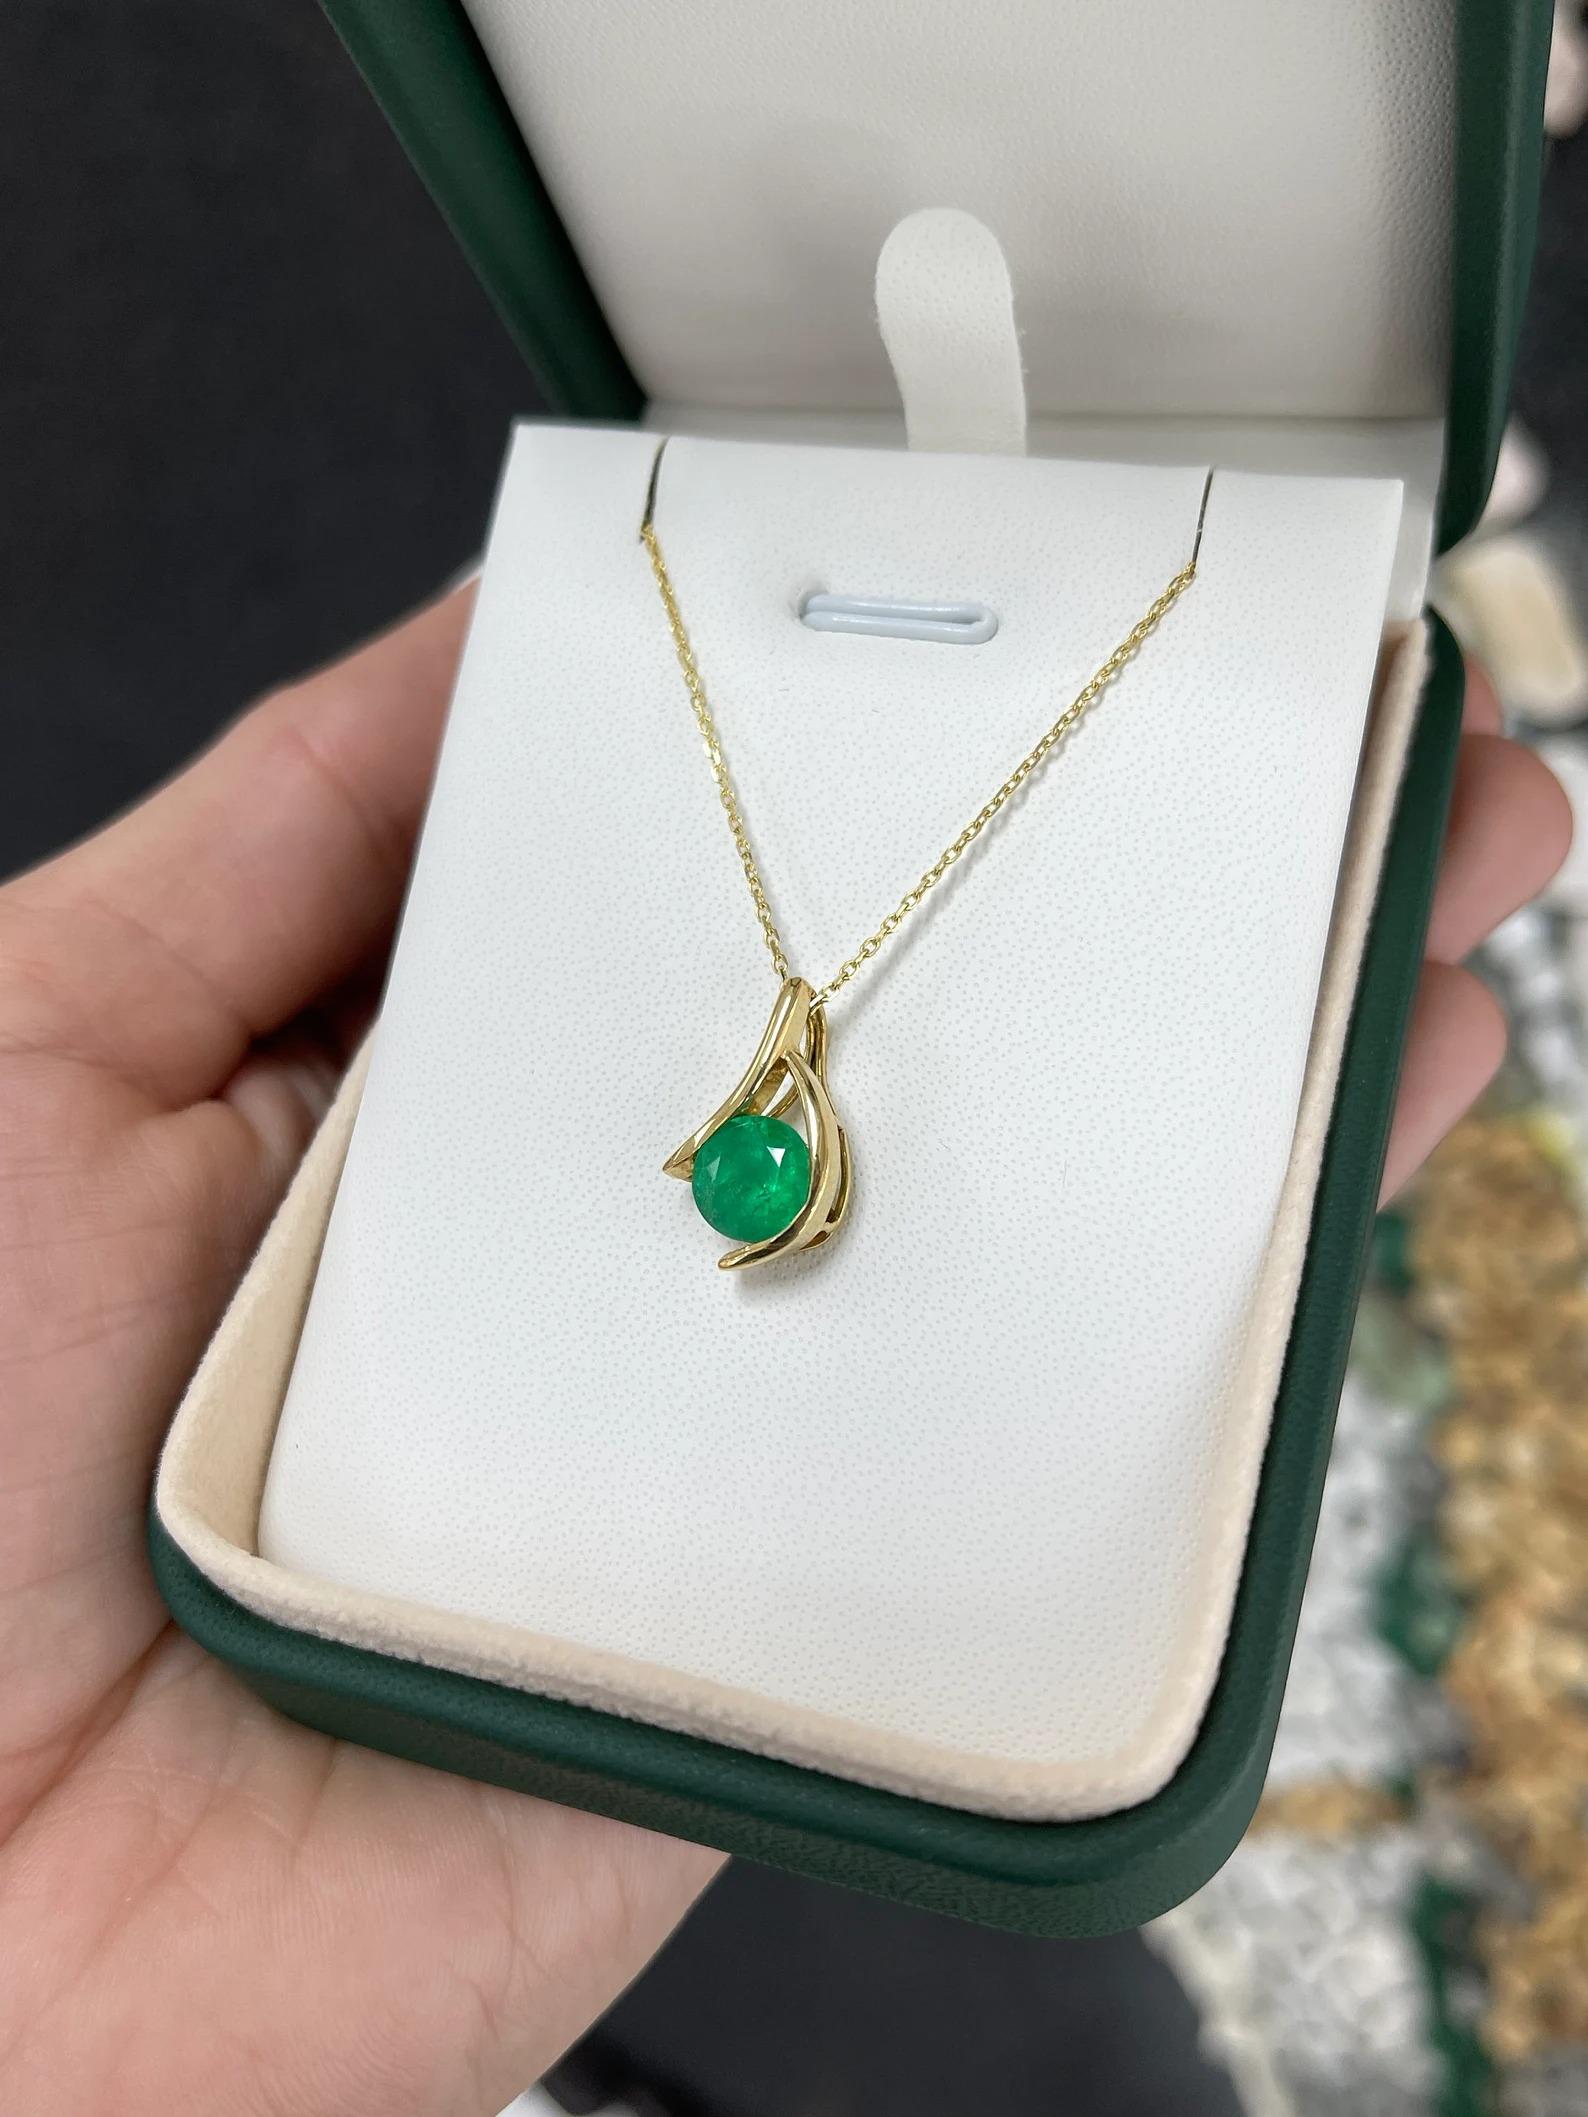 2.0 Carat Colombian Emerald-Round Cut Kanji Shaped Solitaire Pendant Gold 14K In New Condition For Sale In Jupiter, FL